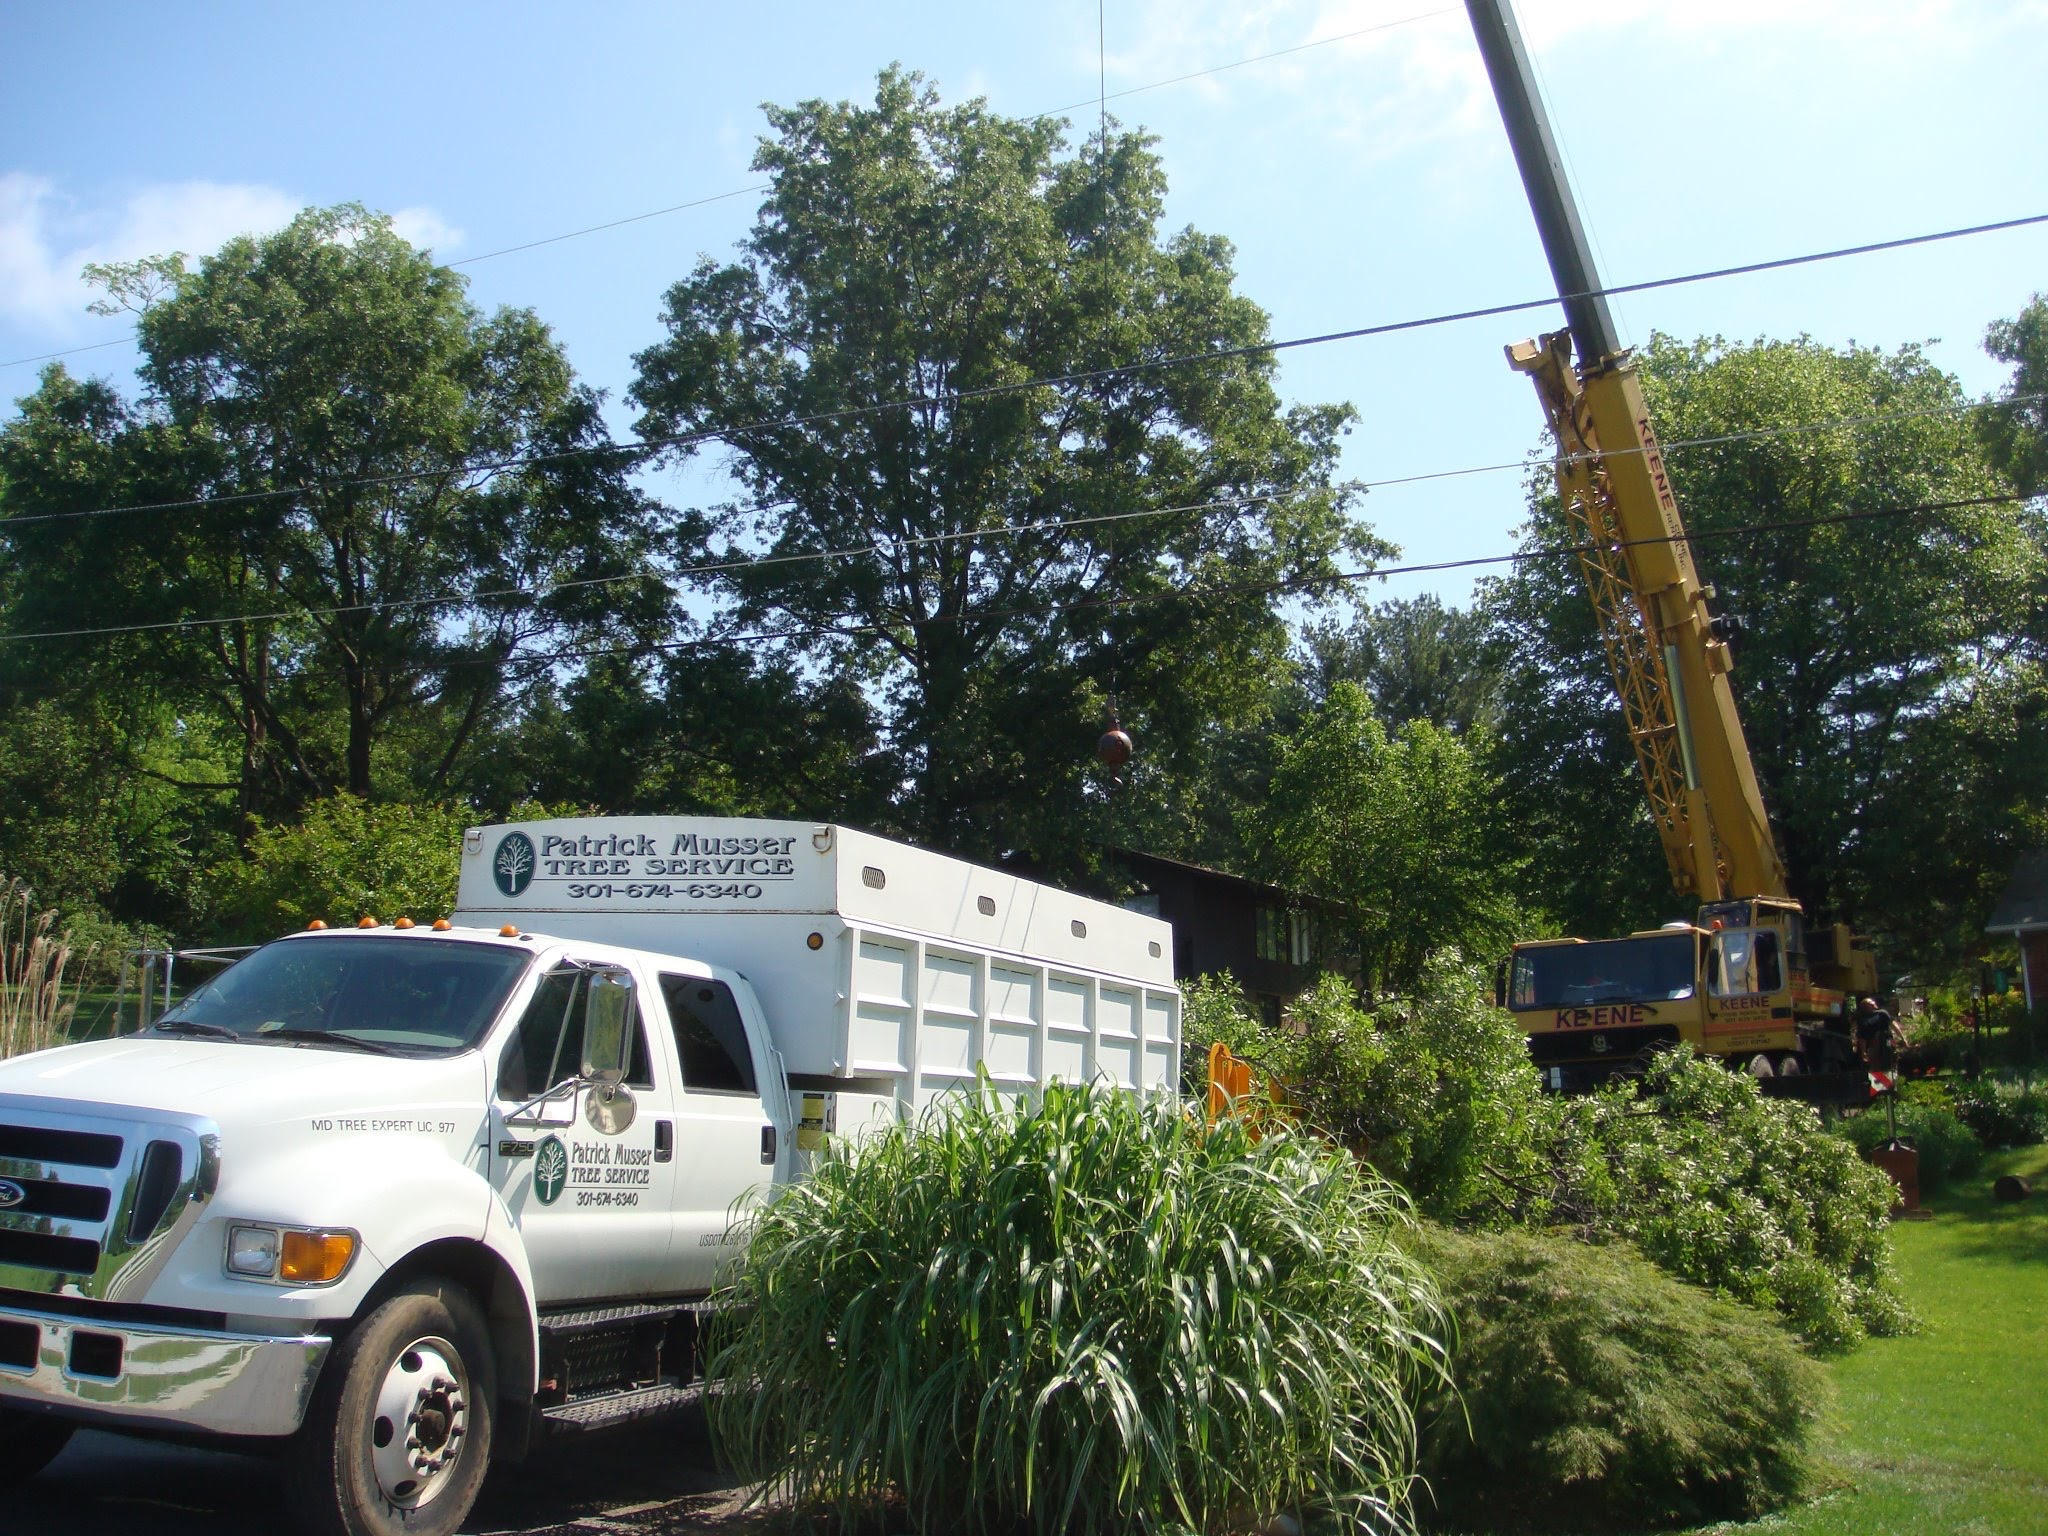 Tree Service Truck and Equipment in Bethesda MD